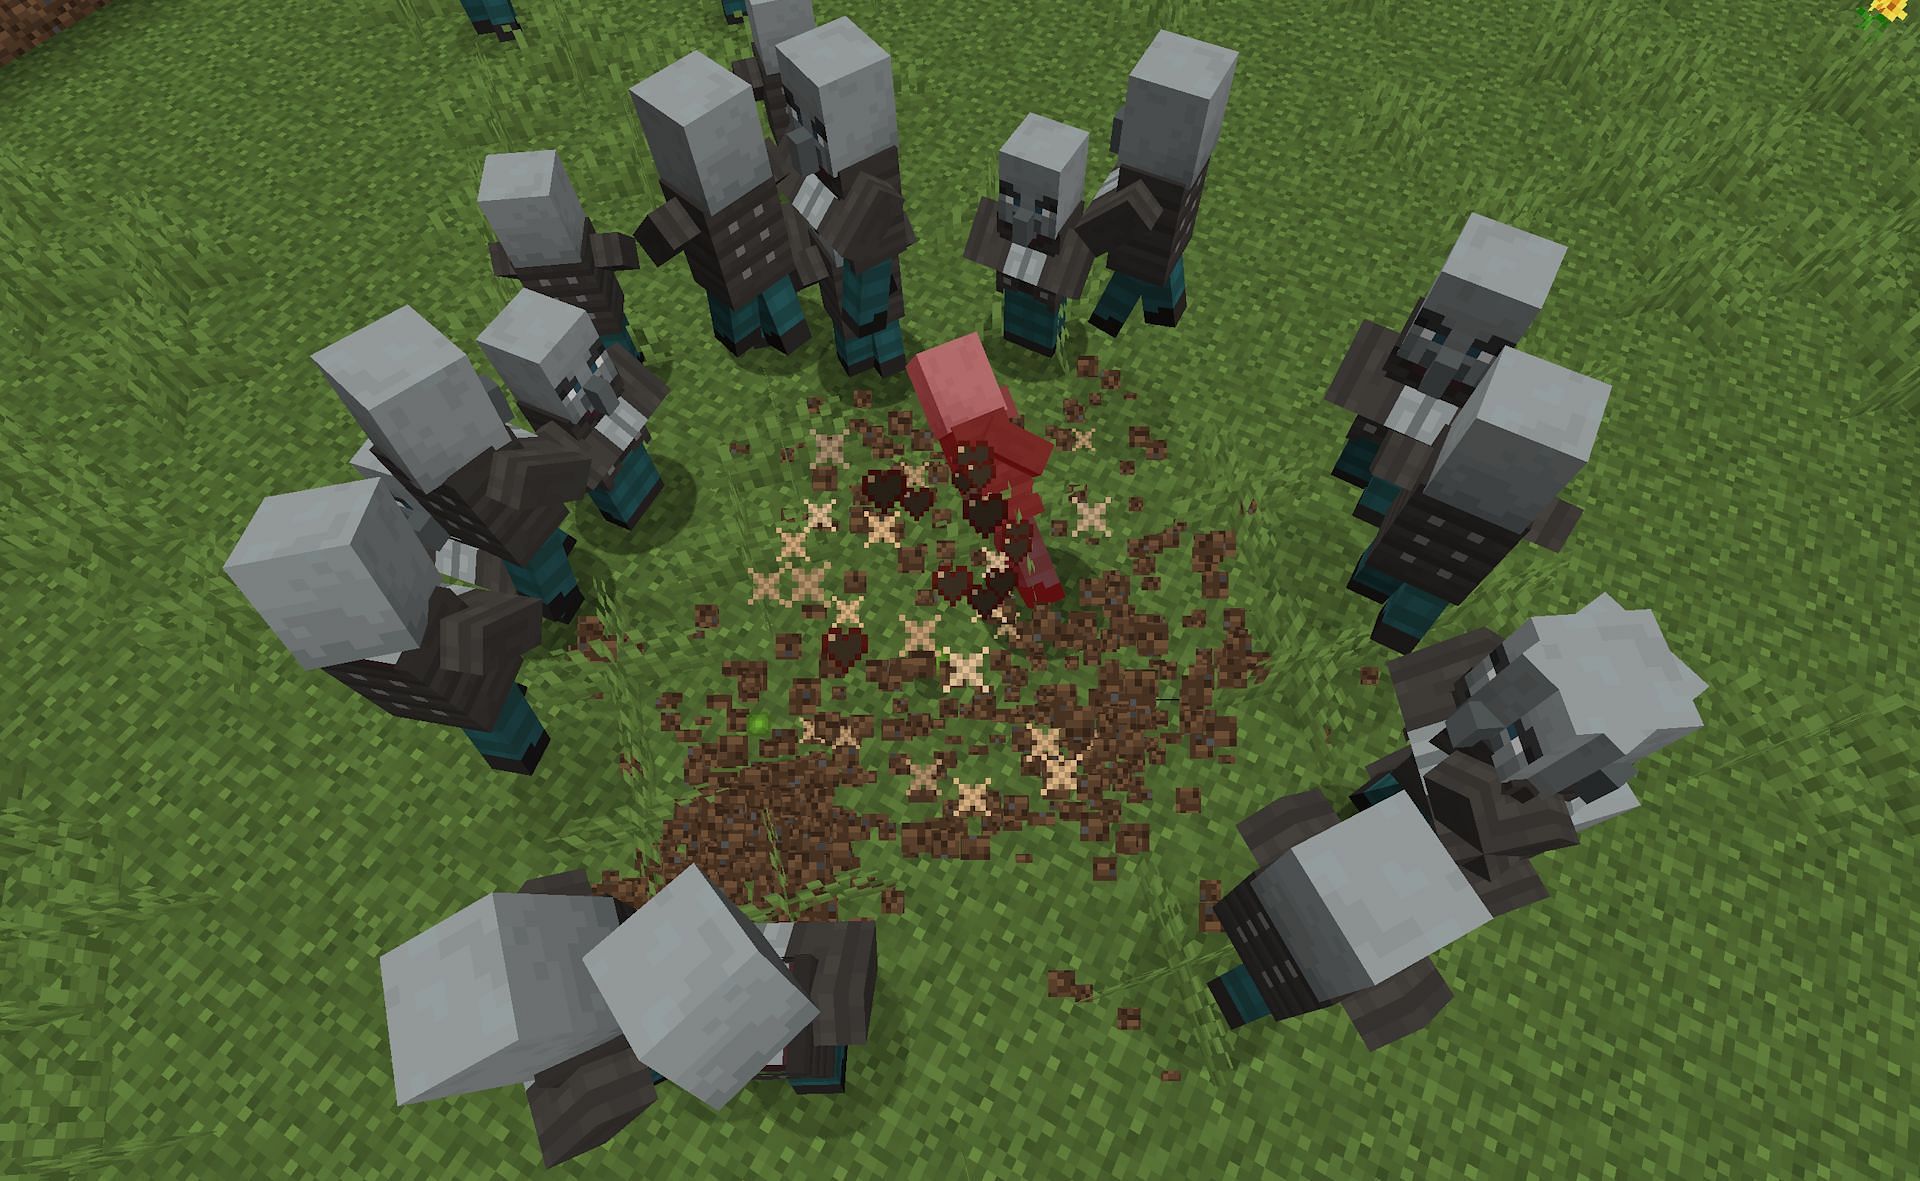 Not only does the mace deal great damage, but it also has a huge AOE knockback effect (Image via Mojang)